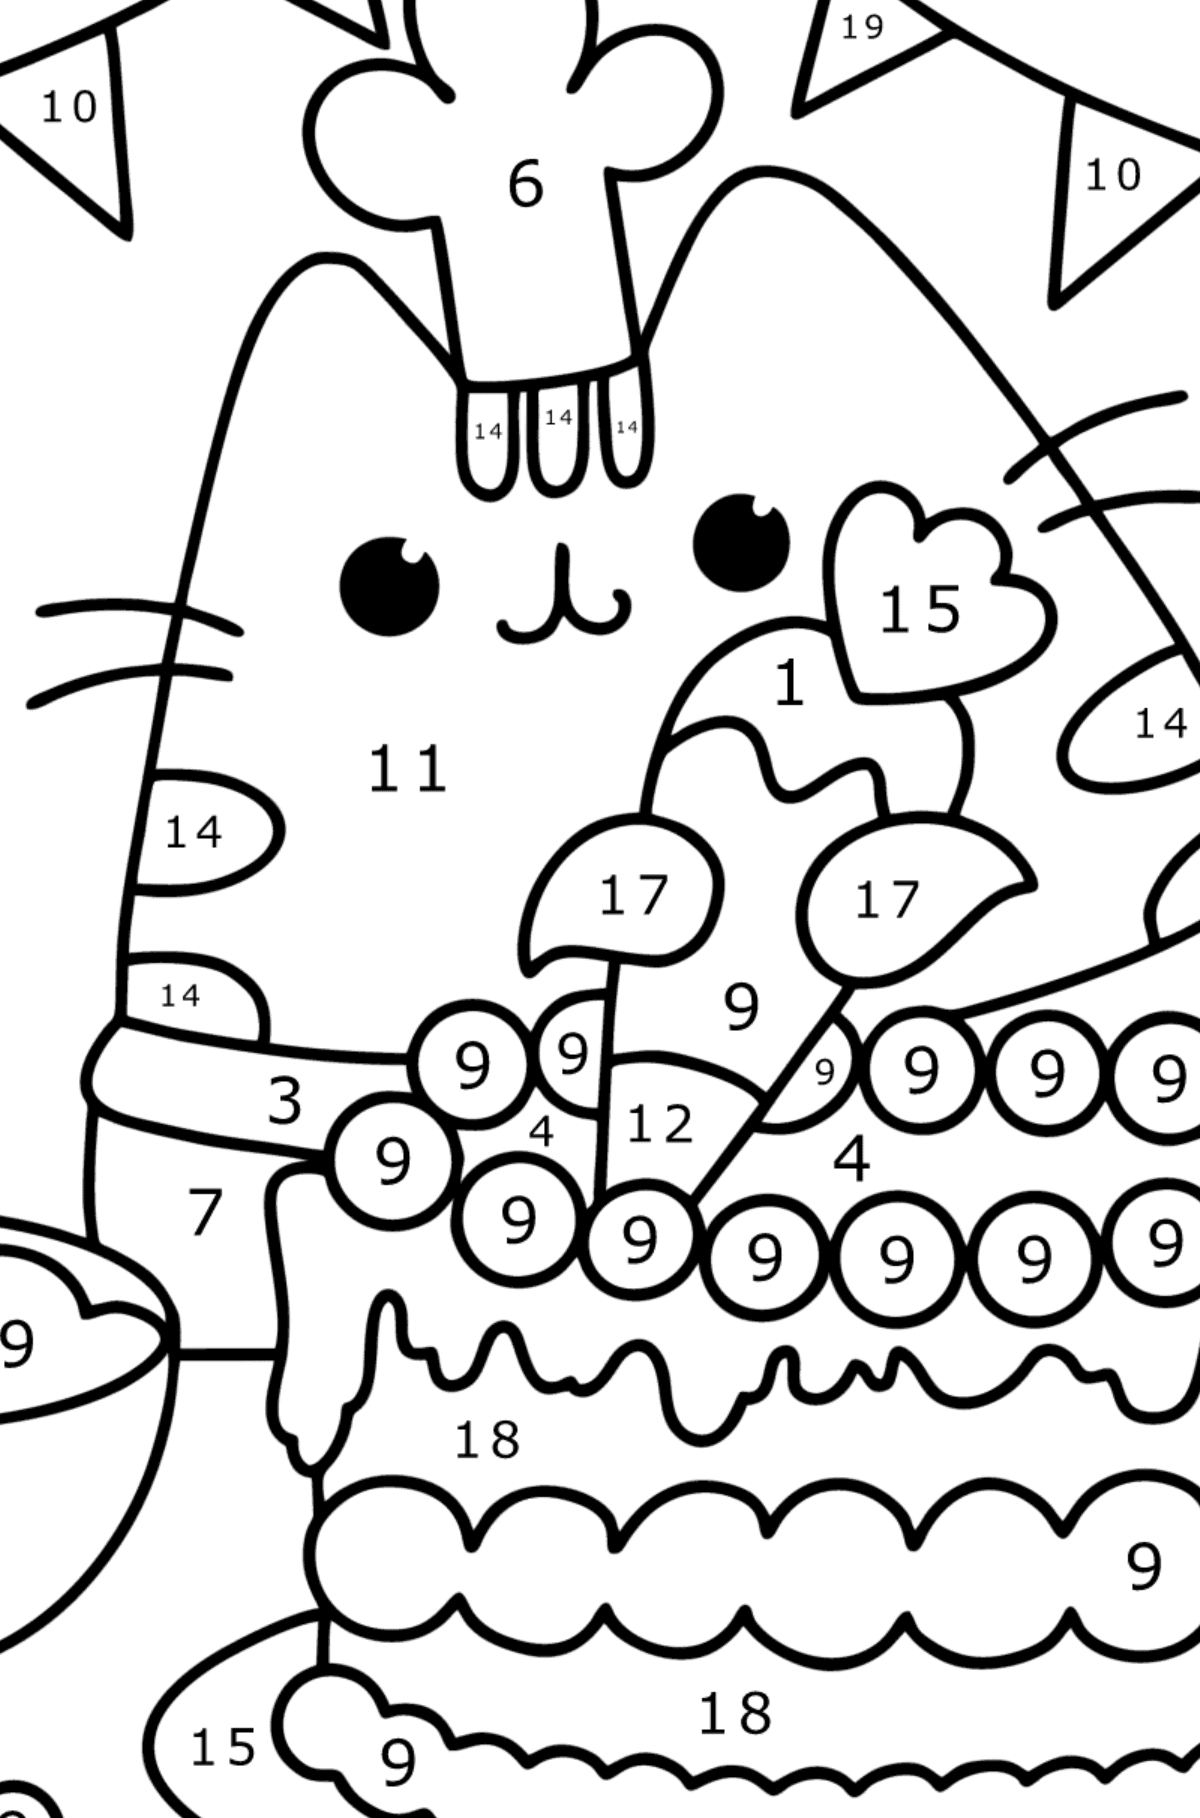 Pusheen birthday сolouring page - Coloring by Numbers for Kids